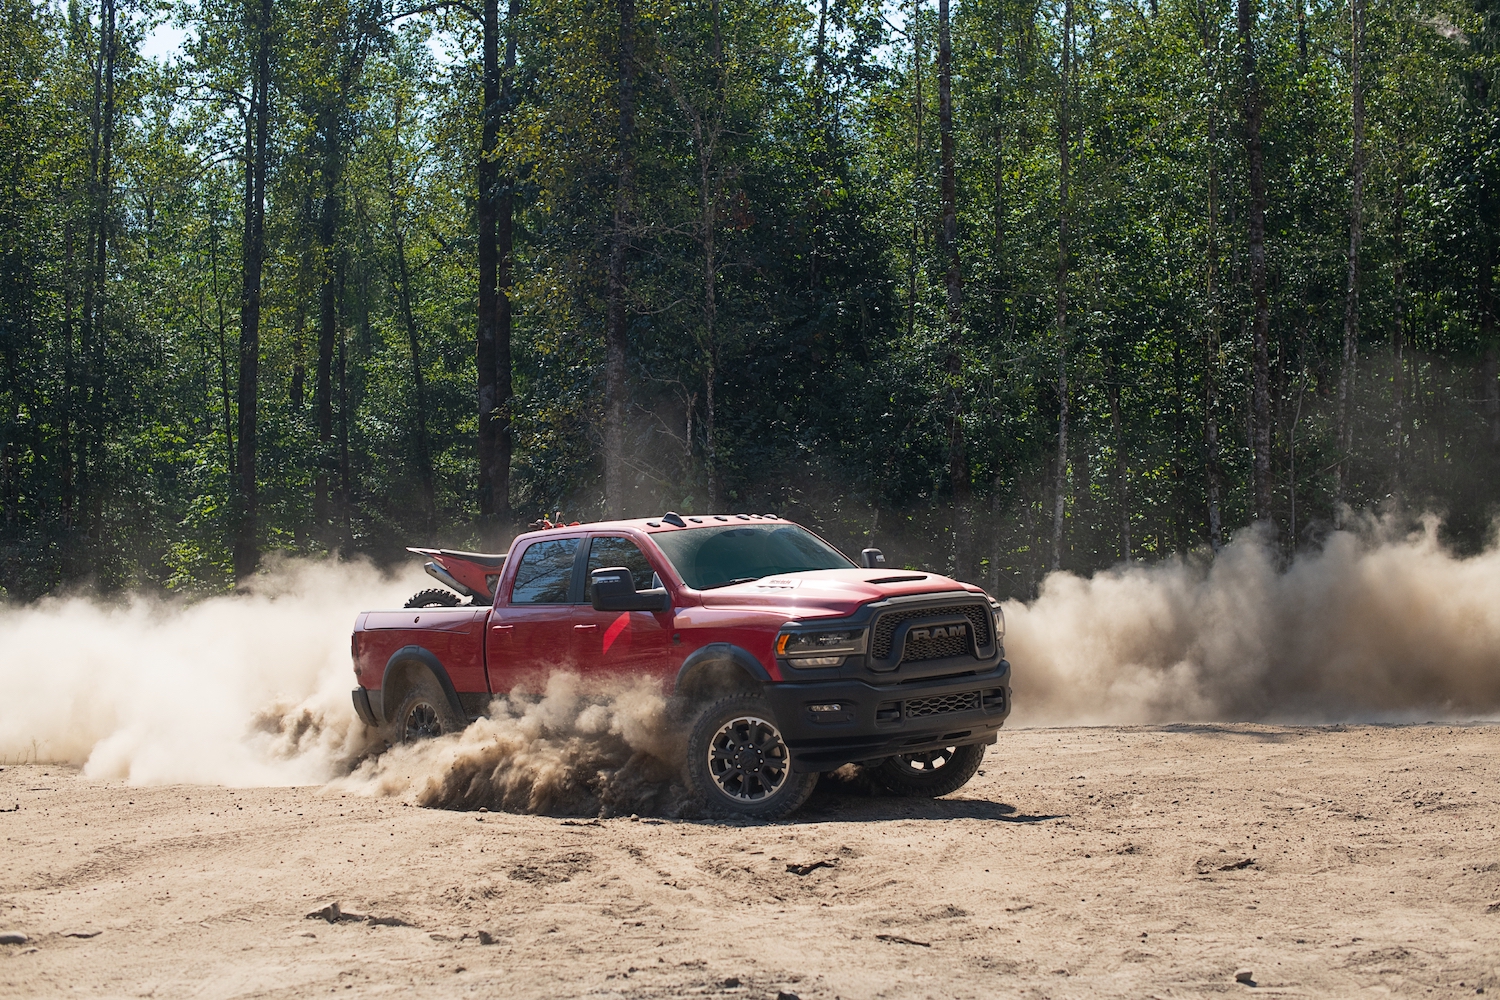 The Ram 2500 heavy-duty rebel truck drives off-road with a dirt bike in its pickup bed.